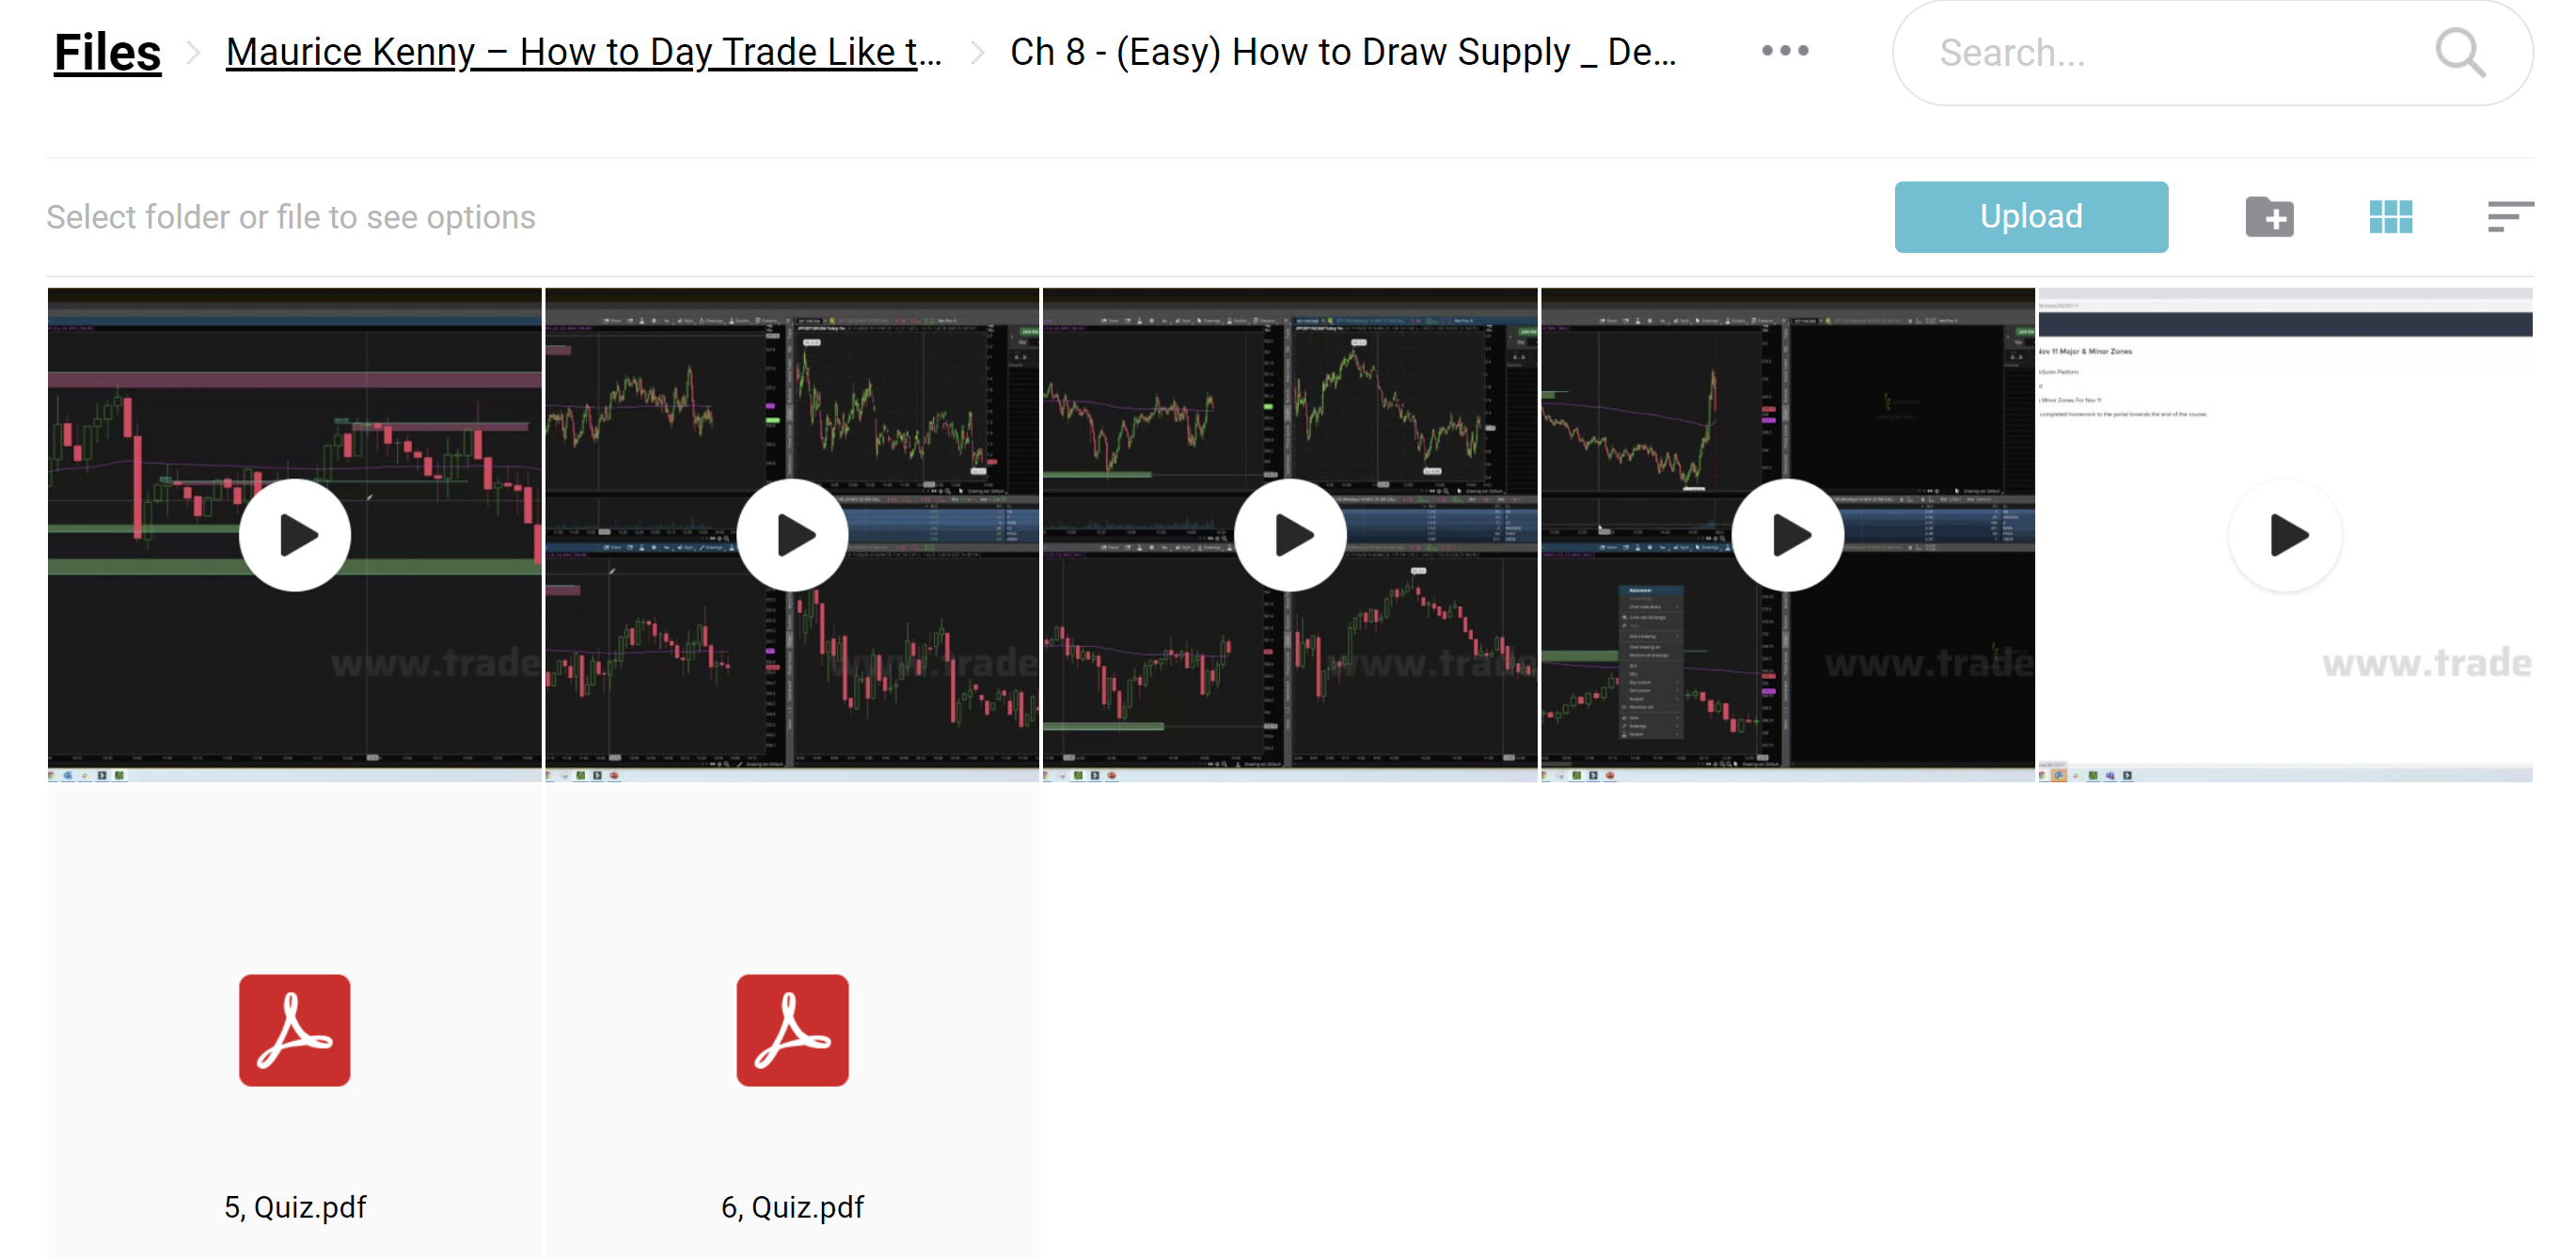 How To Day Trade Like The Top 10